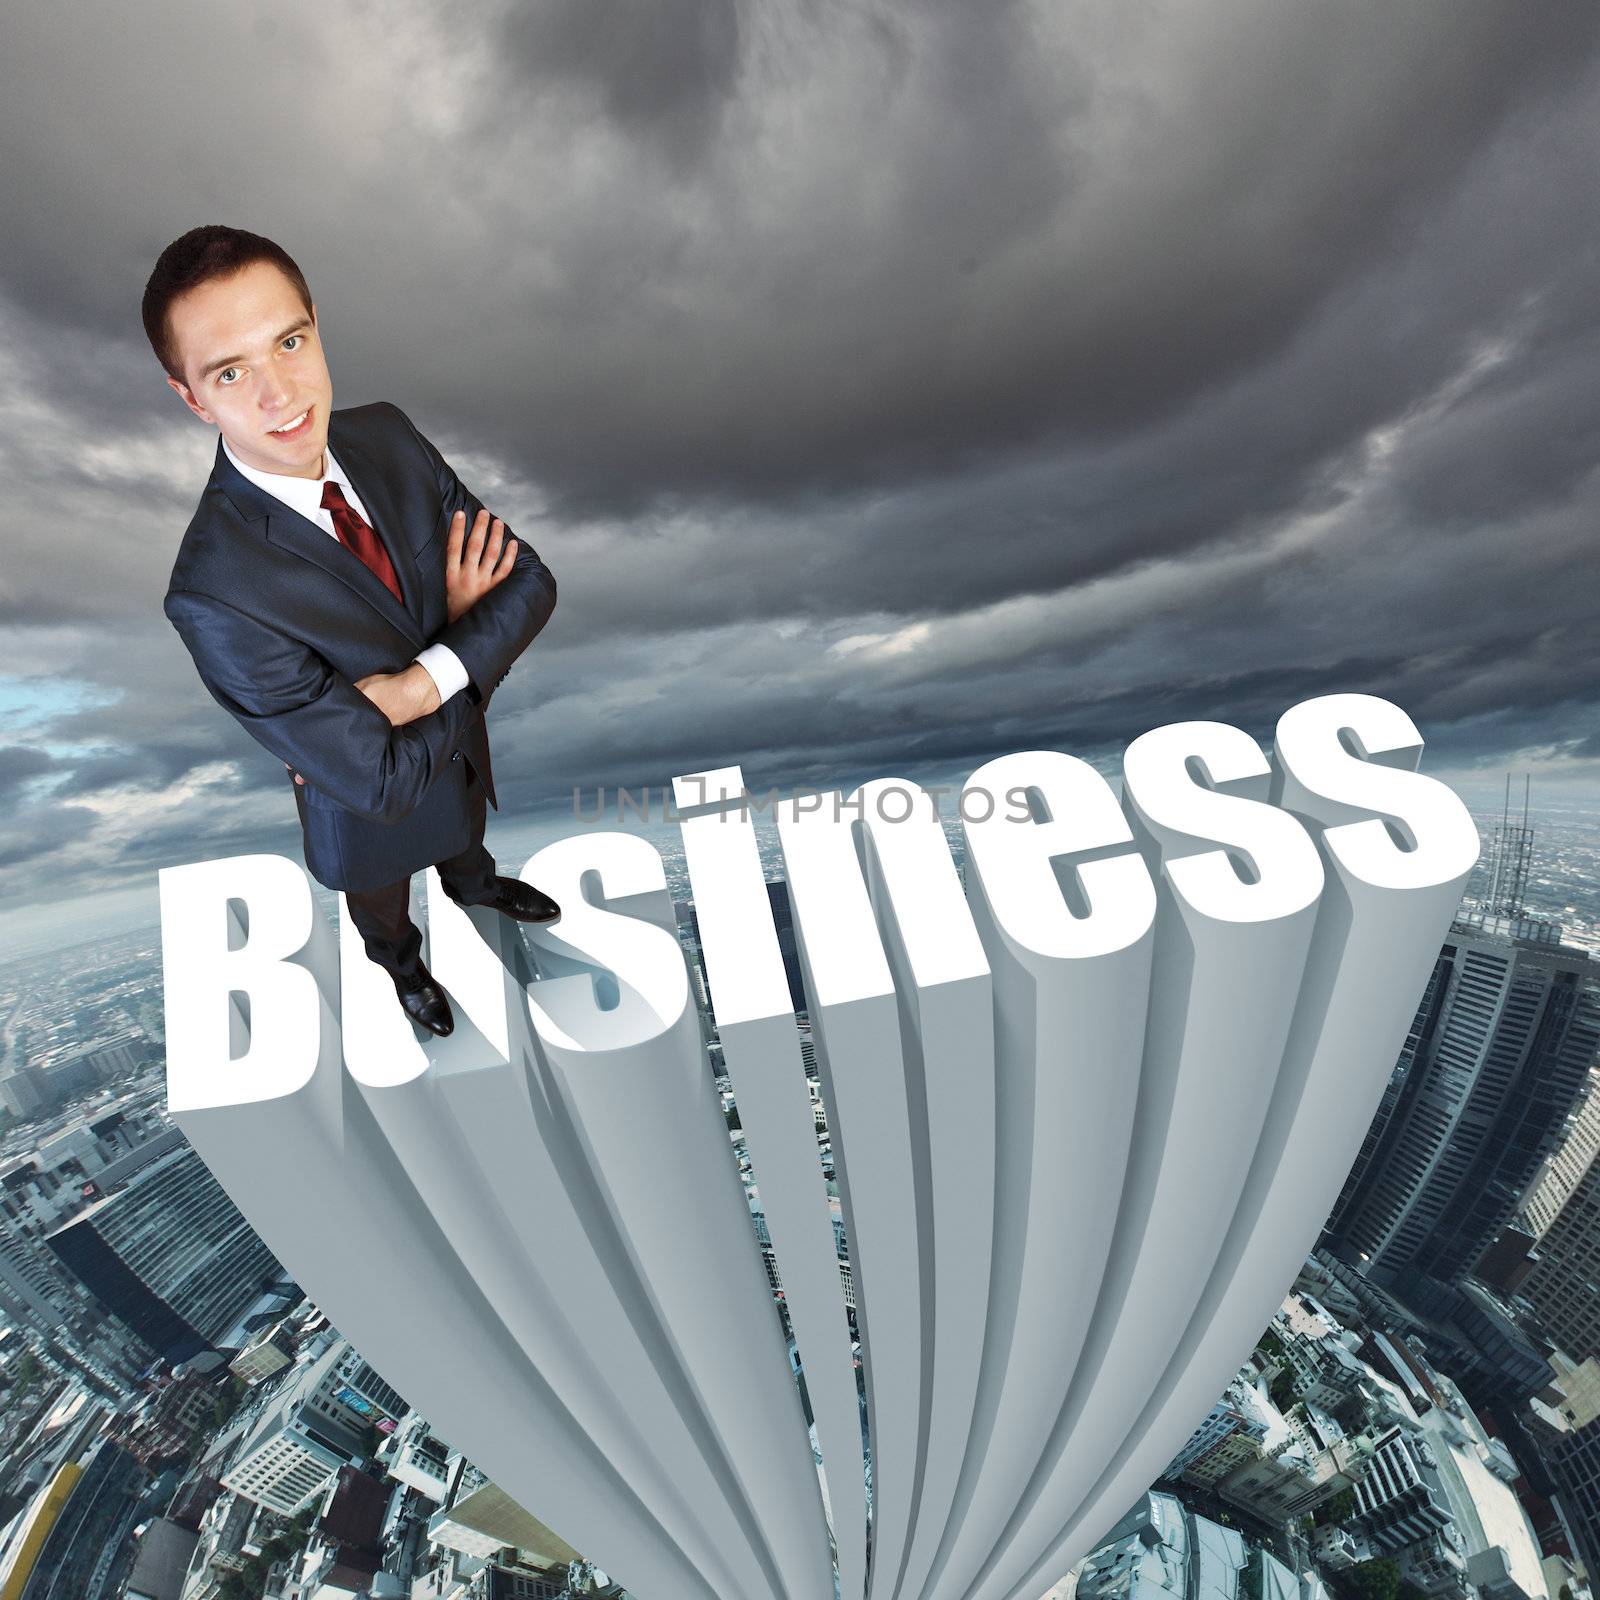 Businessman in suit standing on the word Business